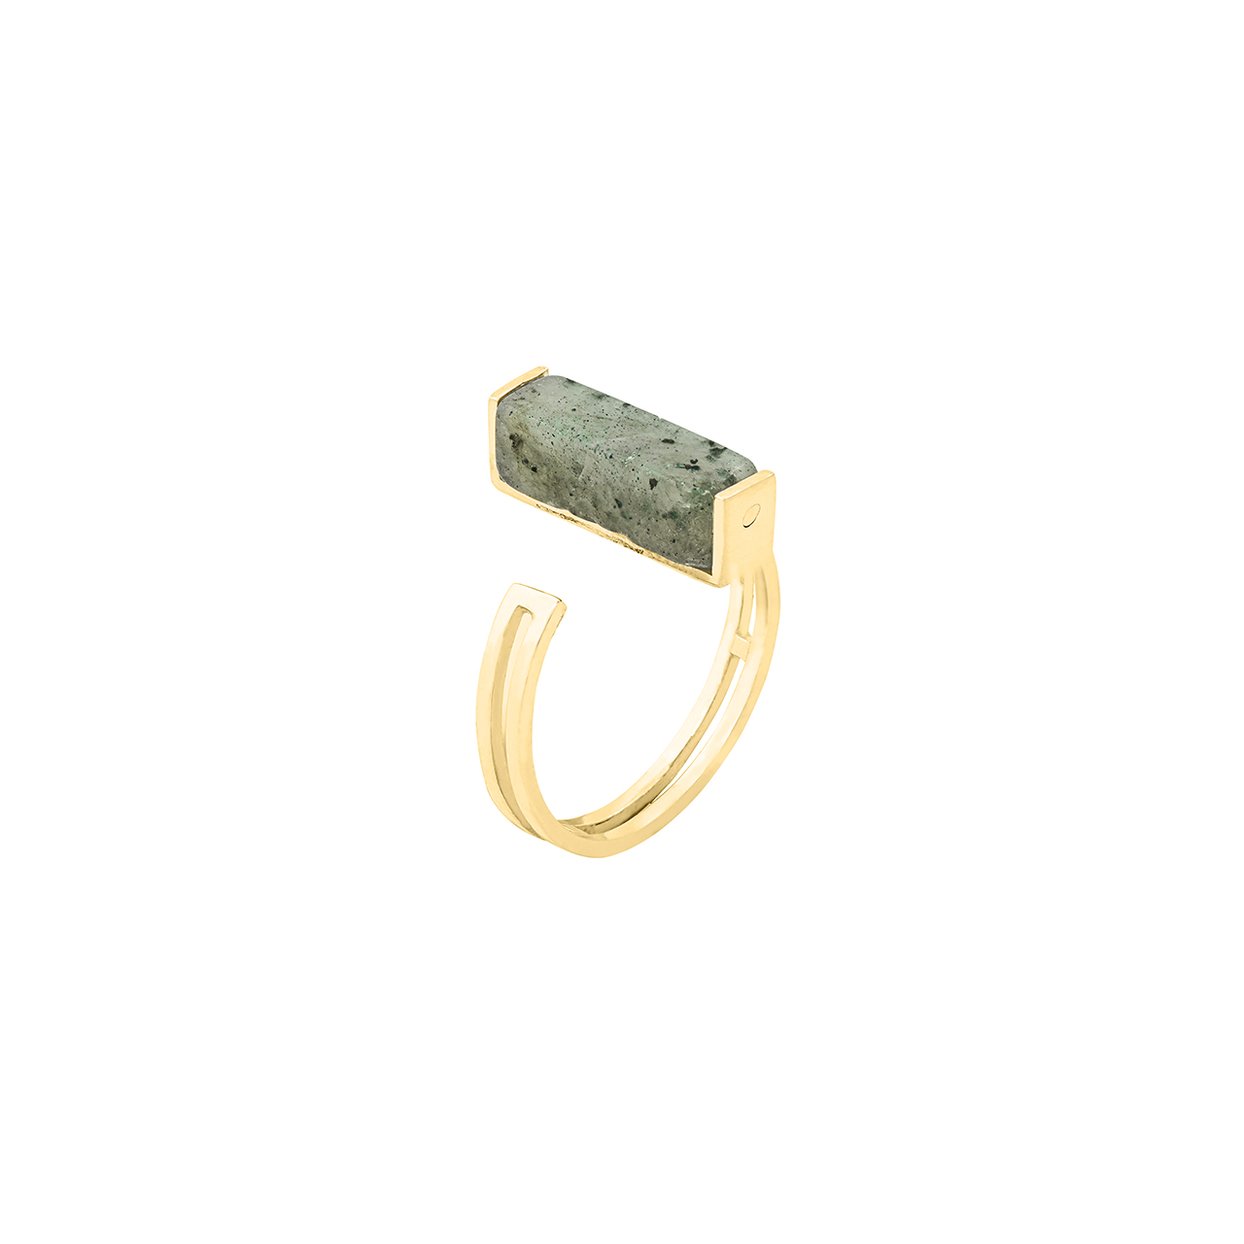 JR7 ring⎜Goldplated⎜52